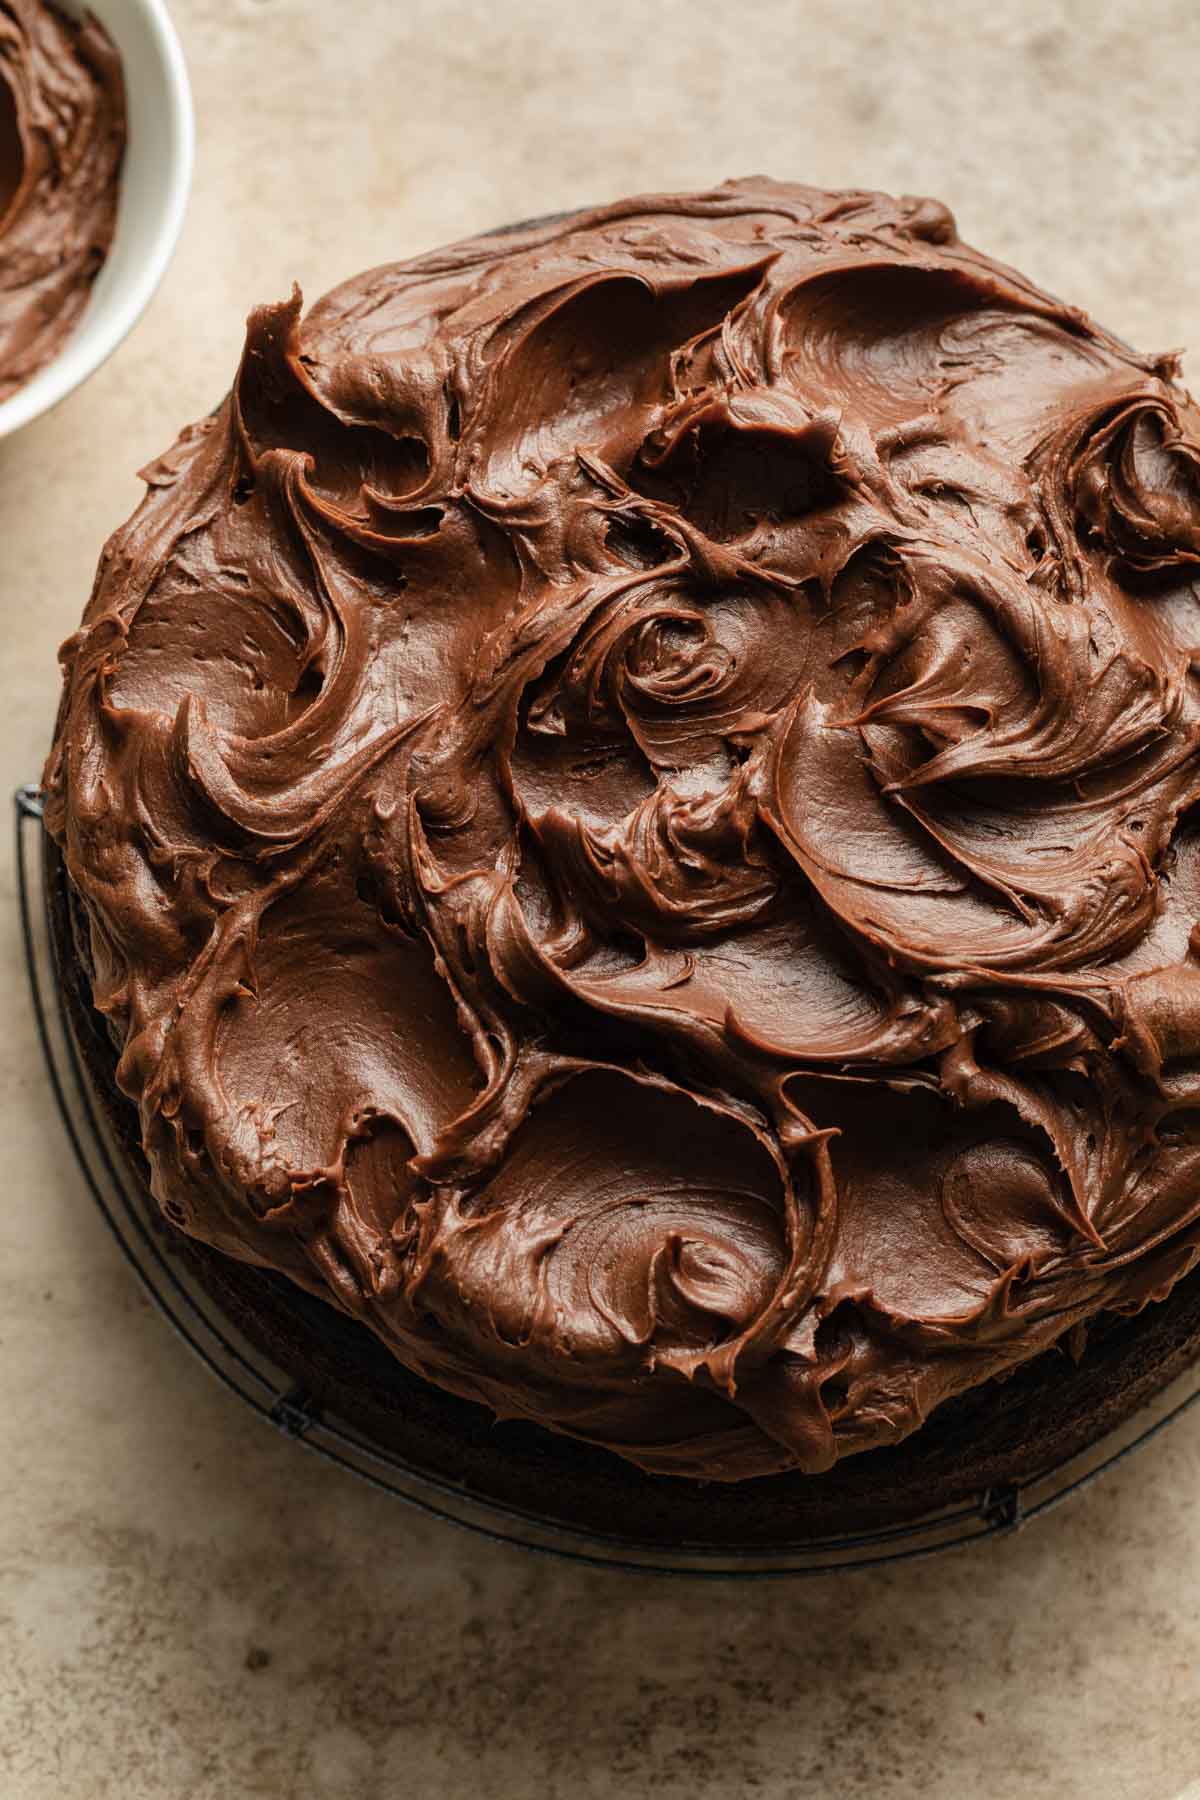 Overhead view of the chocolate frosting swirls on top of the air fryer chocolate cake.